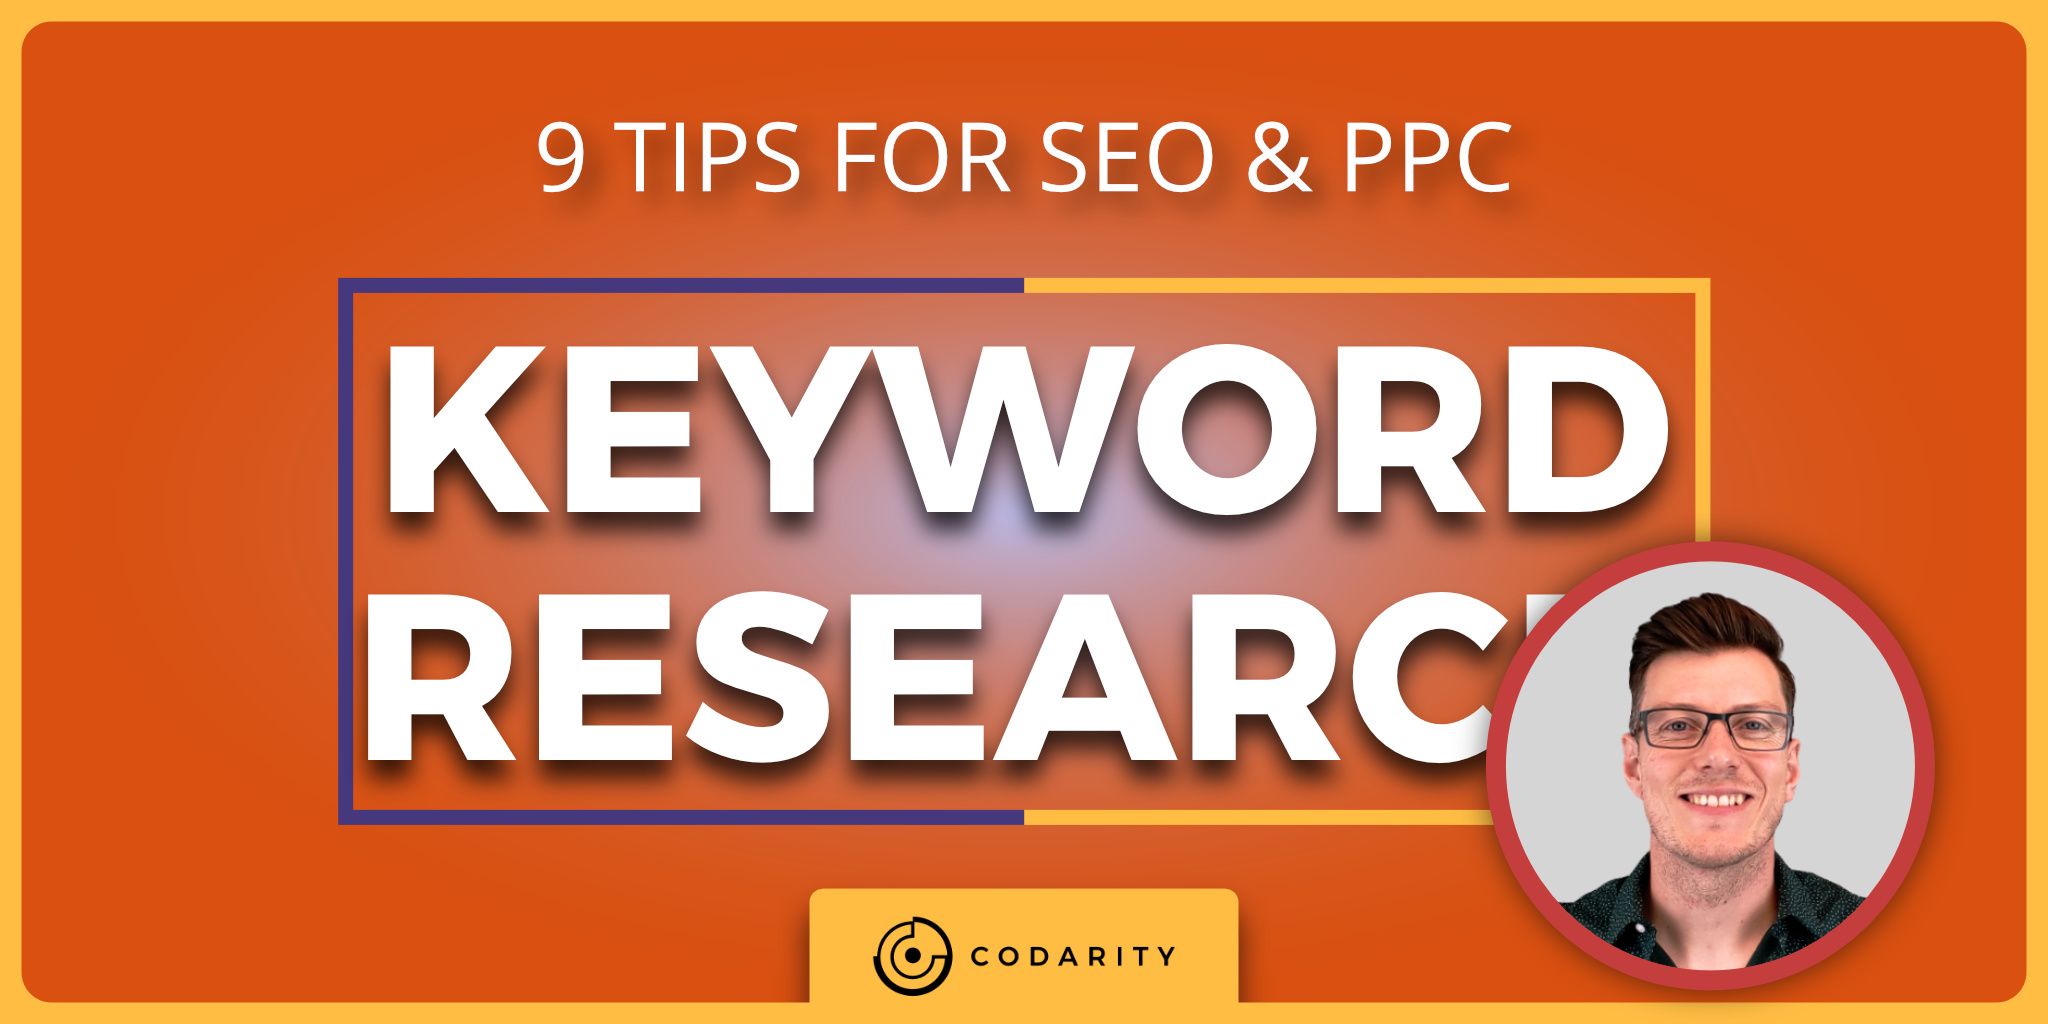 Featured image for “9 Keyword Research Tips for SEO & PPC”